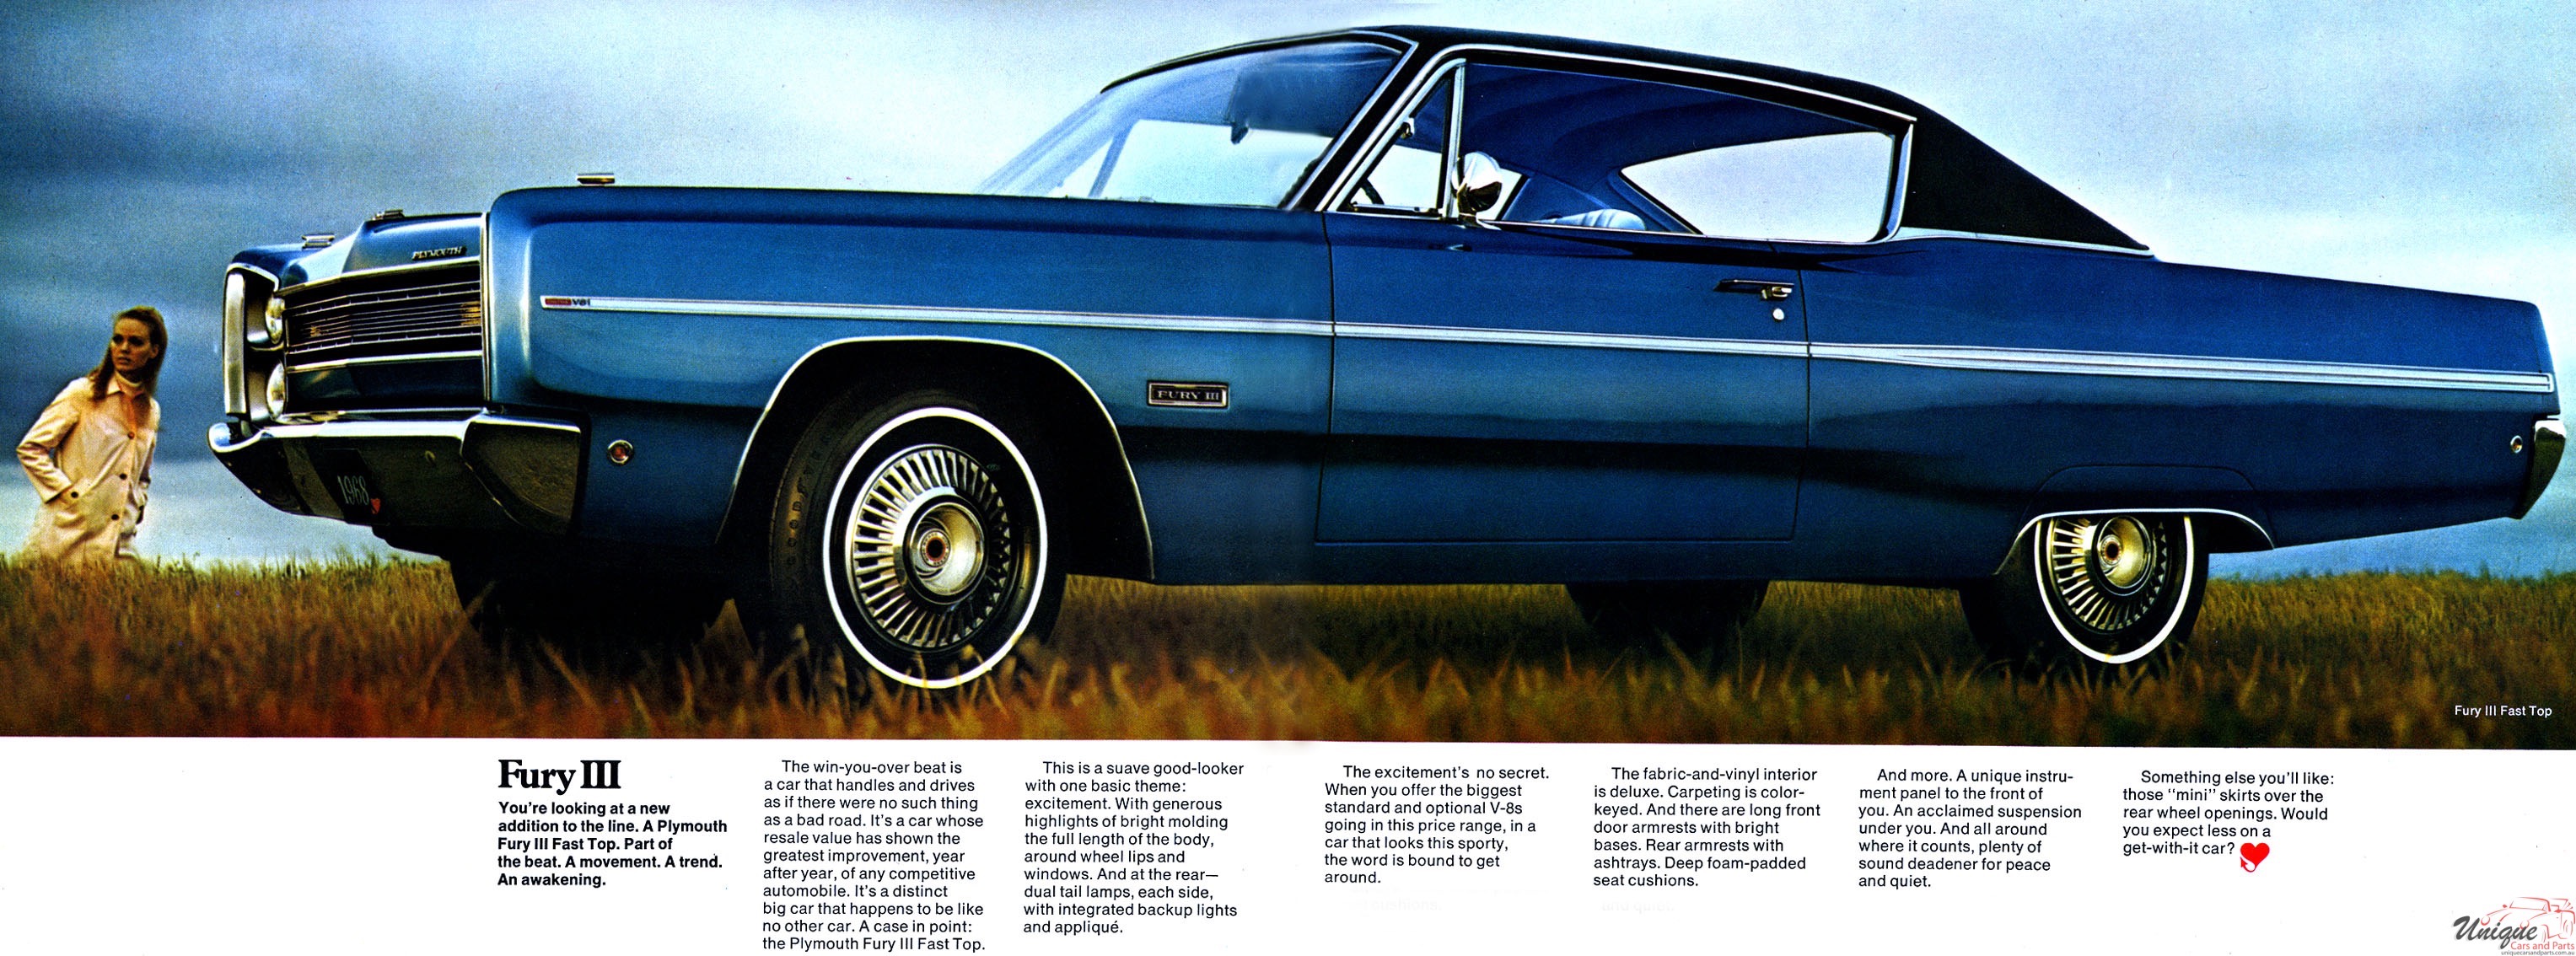 1968 Plymouth All Models Brochure Page 2